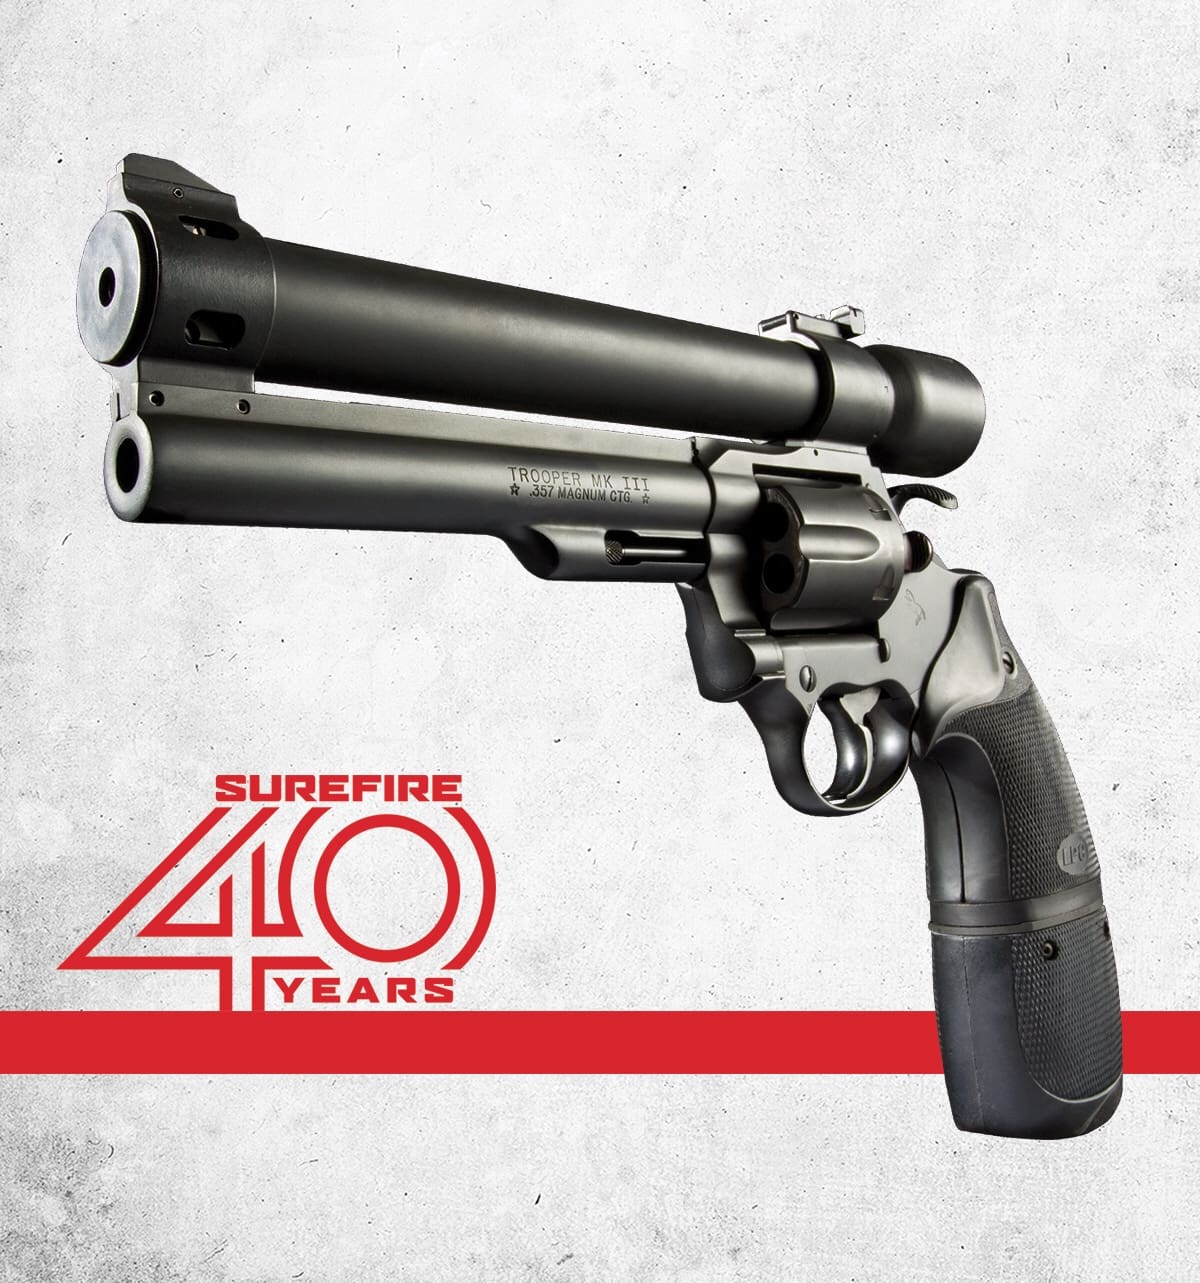 Surefire 40th Anniversary Product Spotlight Soldier Systems Daily